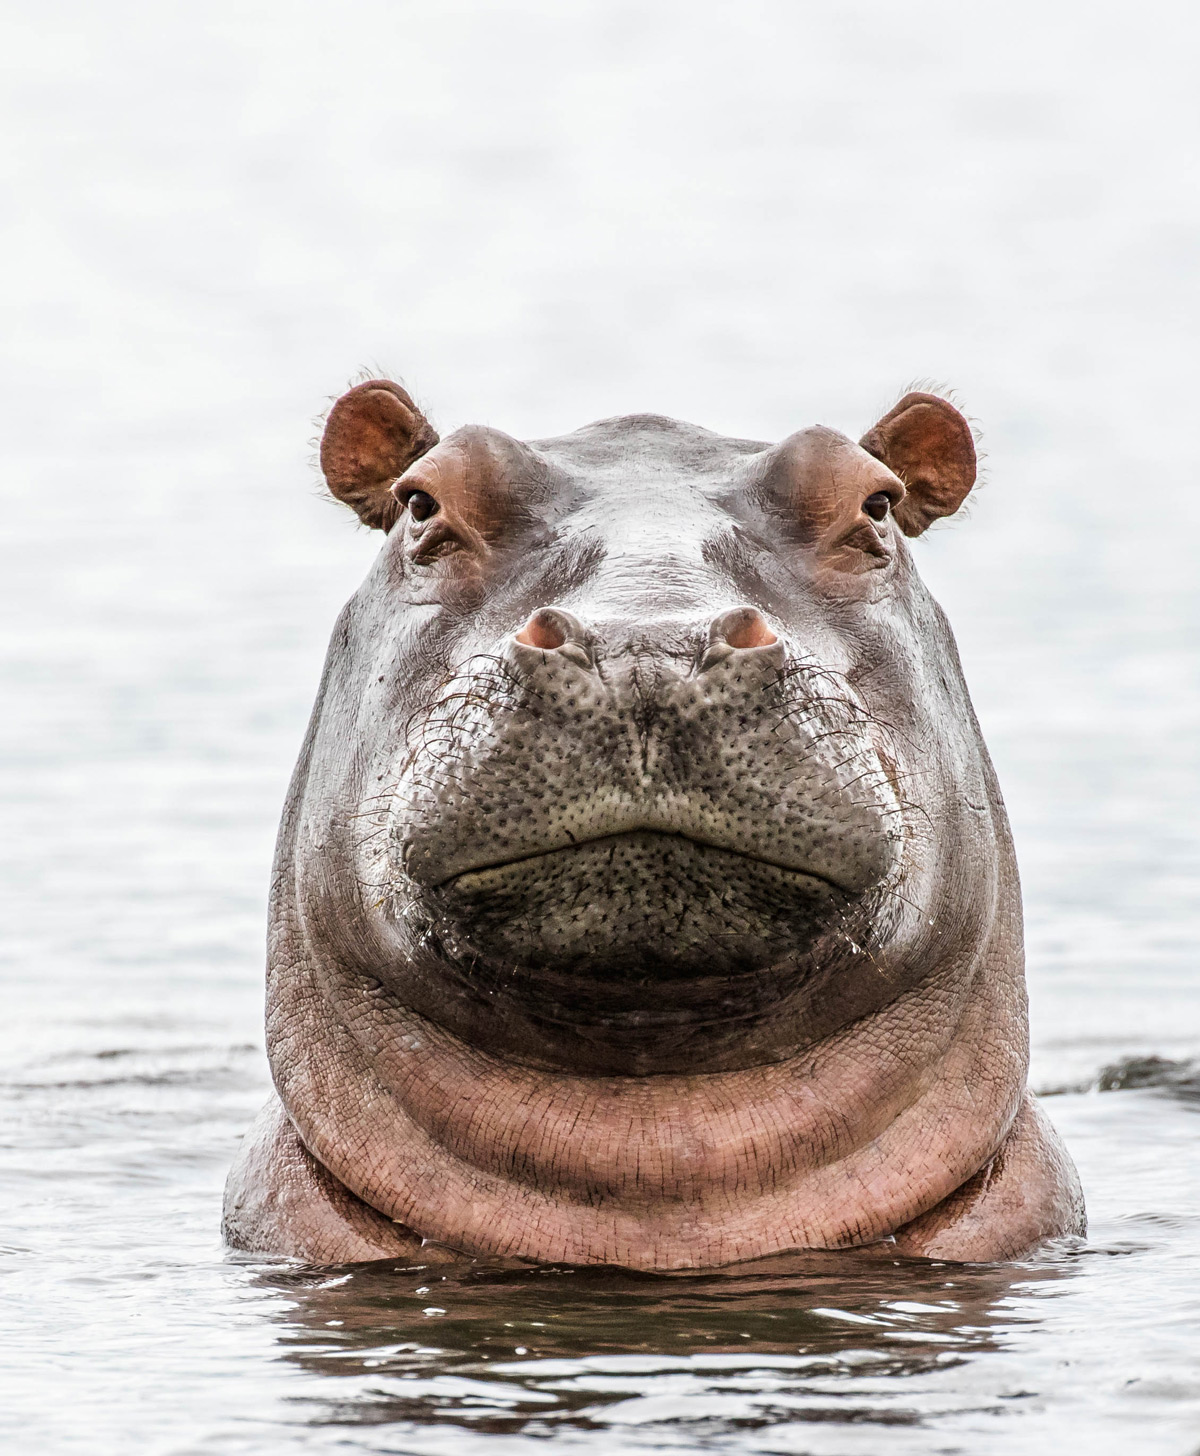 A hippo spotted in the Chobe River in Chobe National Park, Botswana © Cheryl Cranfield